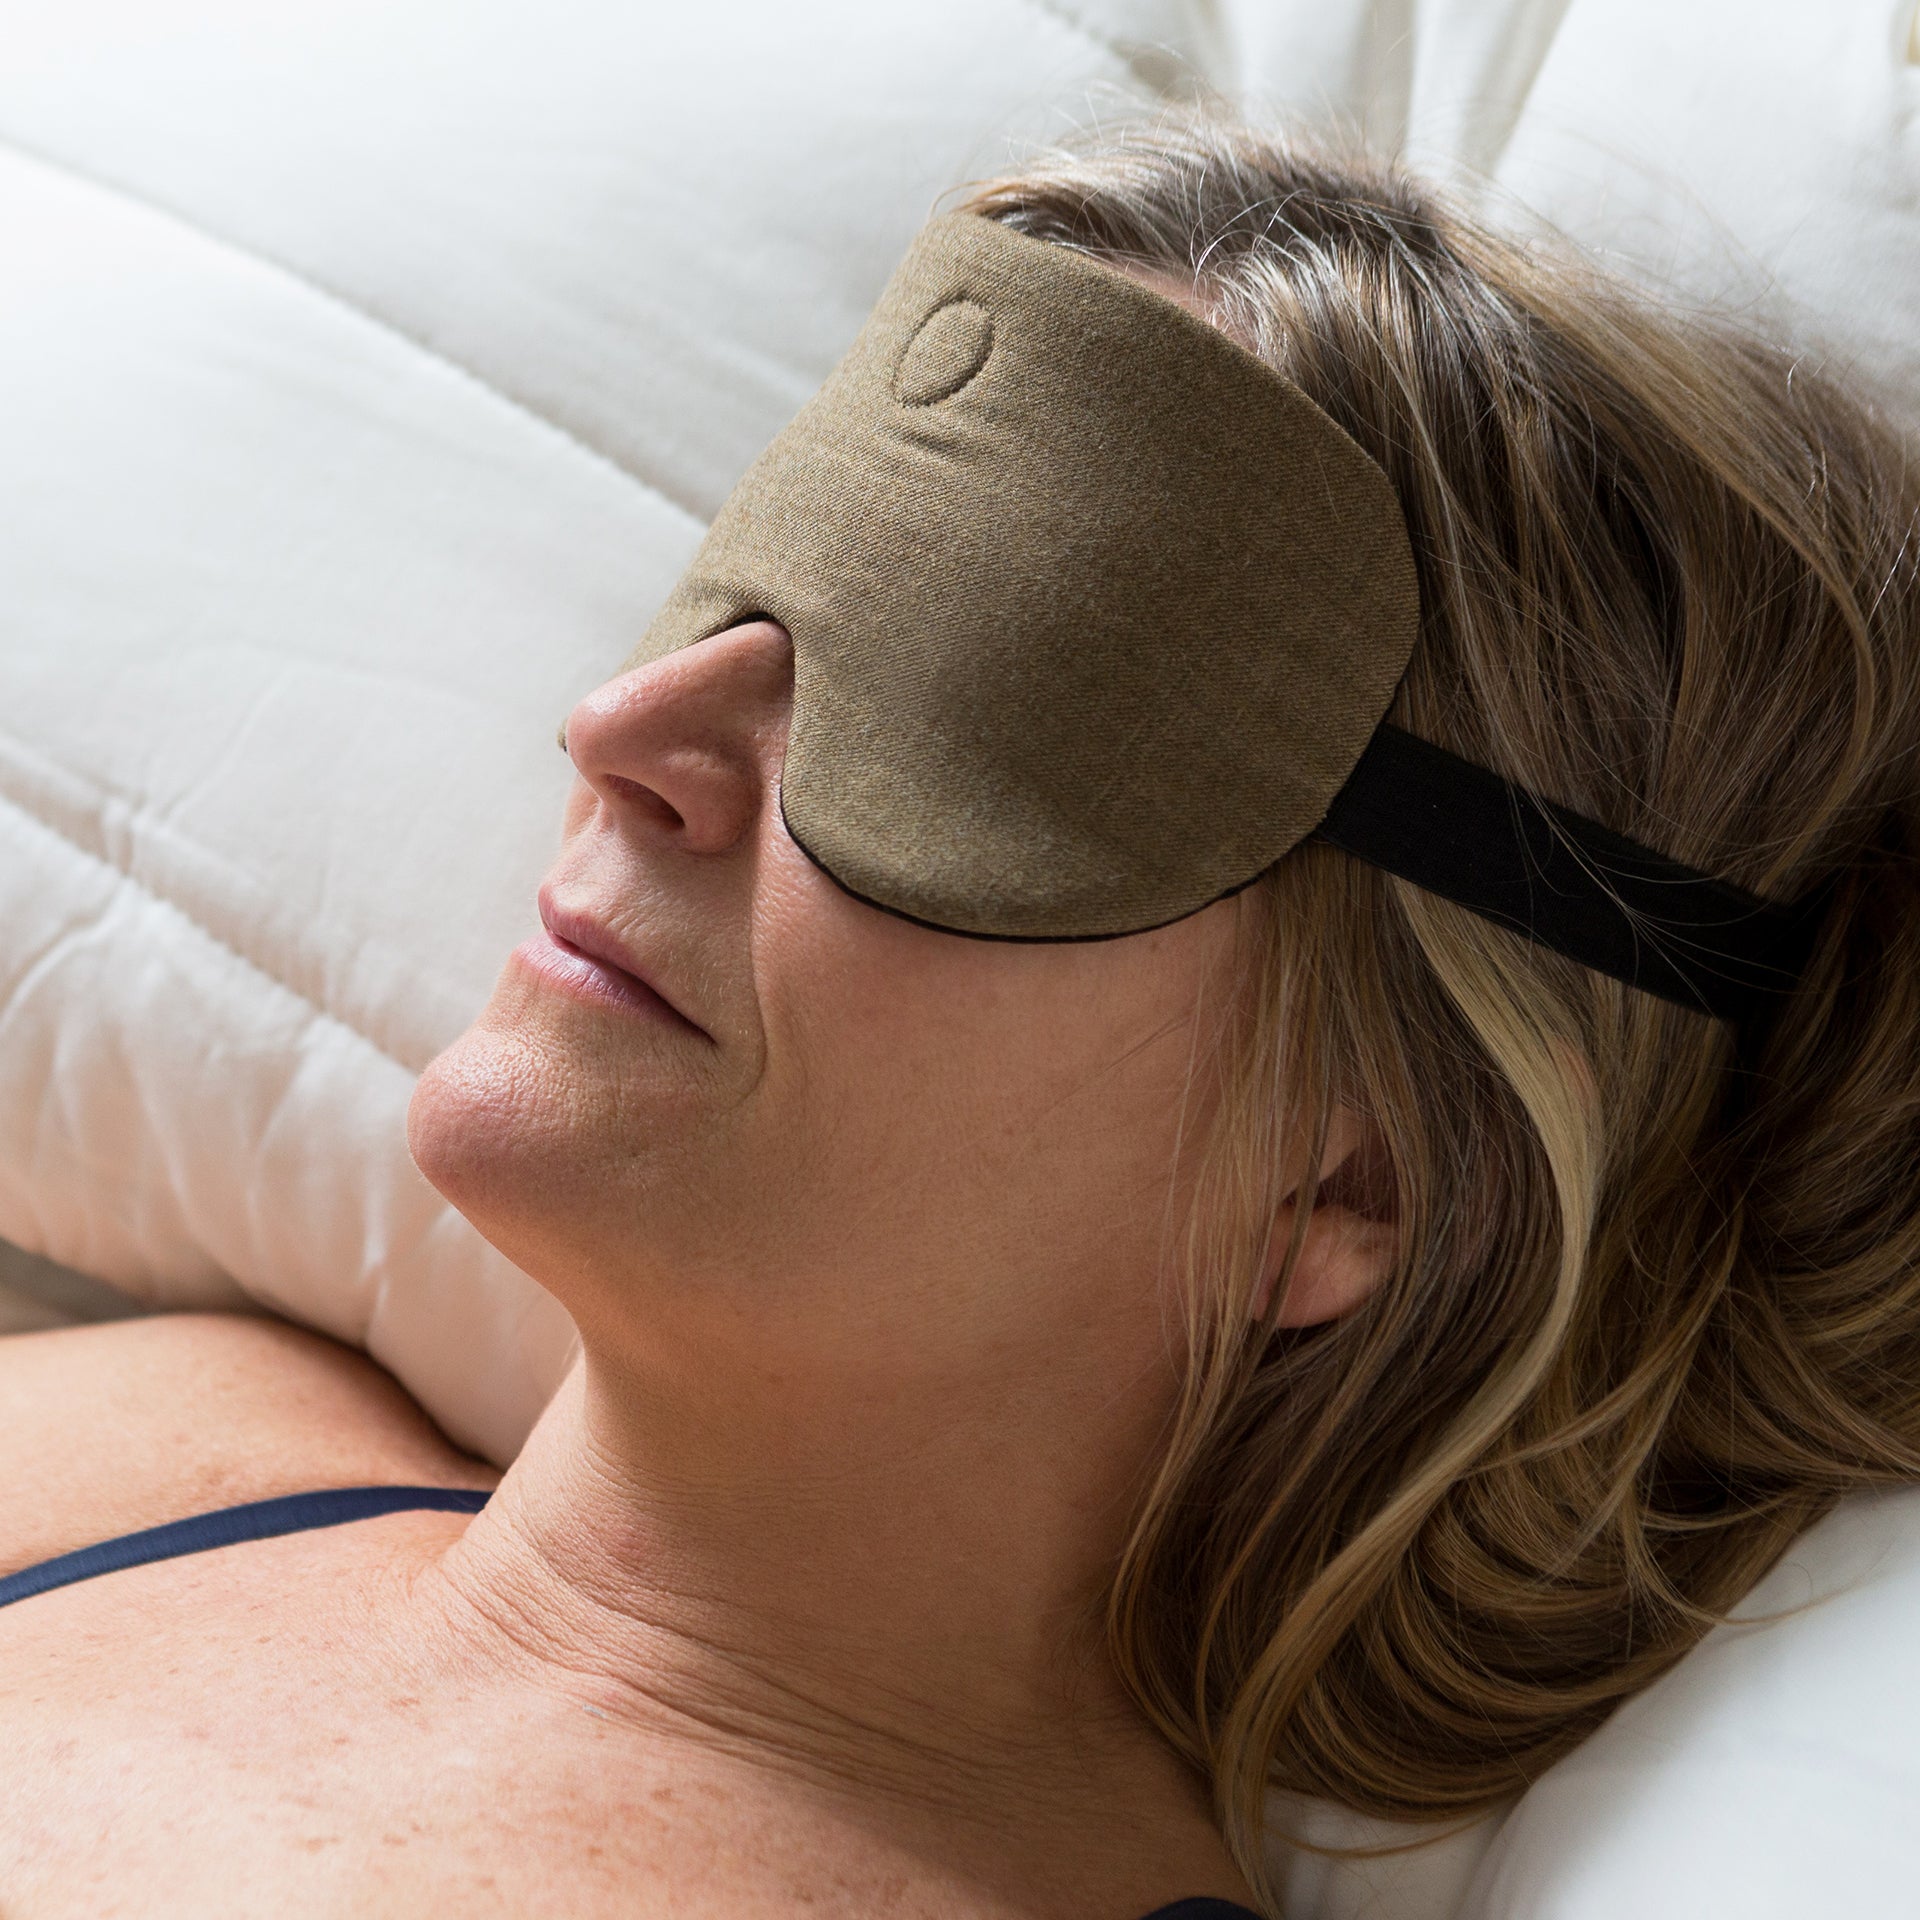 3-Layer Sleep Mask: Buy 100% Cool Wool Black-Out Mask – You Are What Sleep